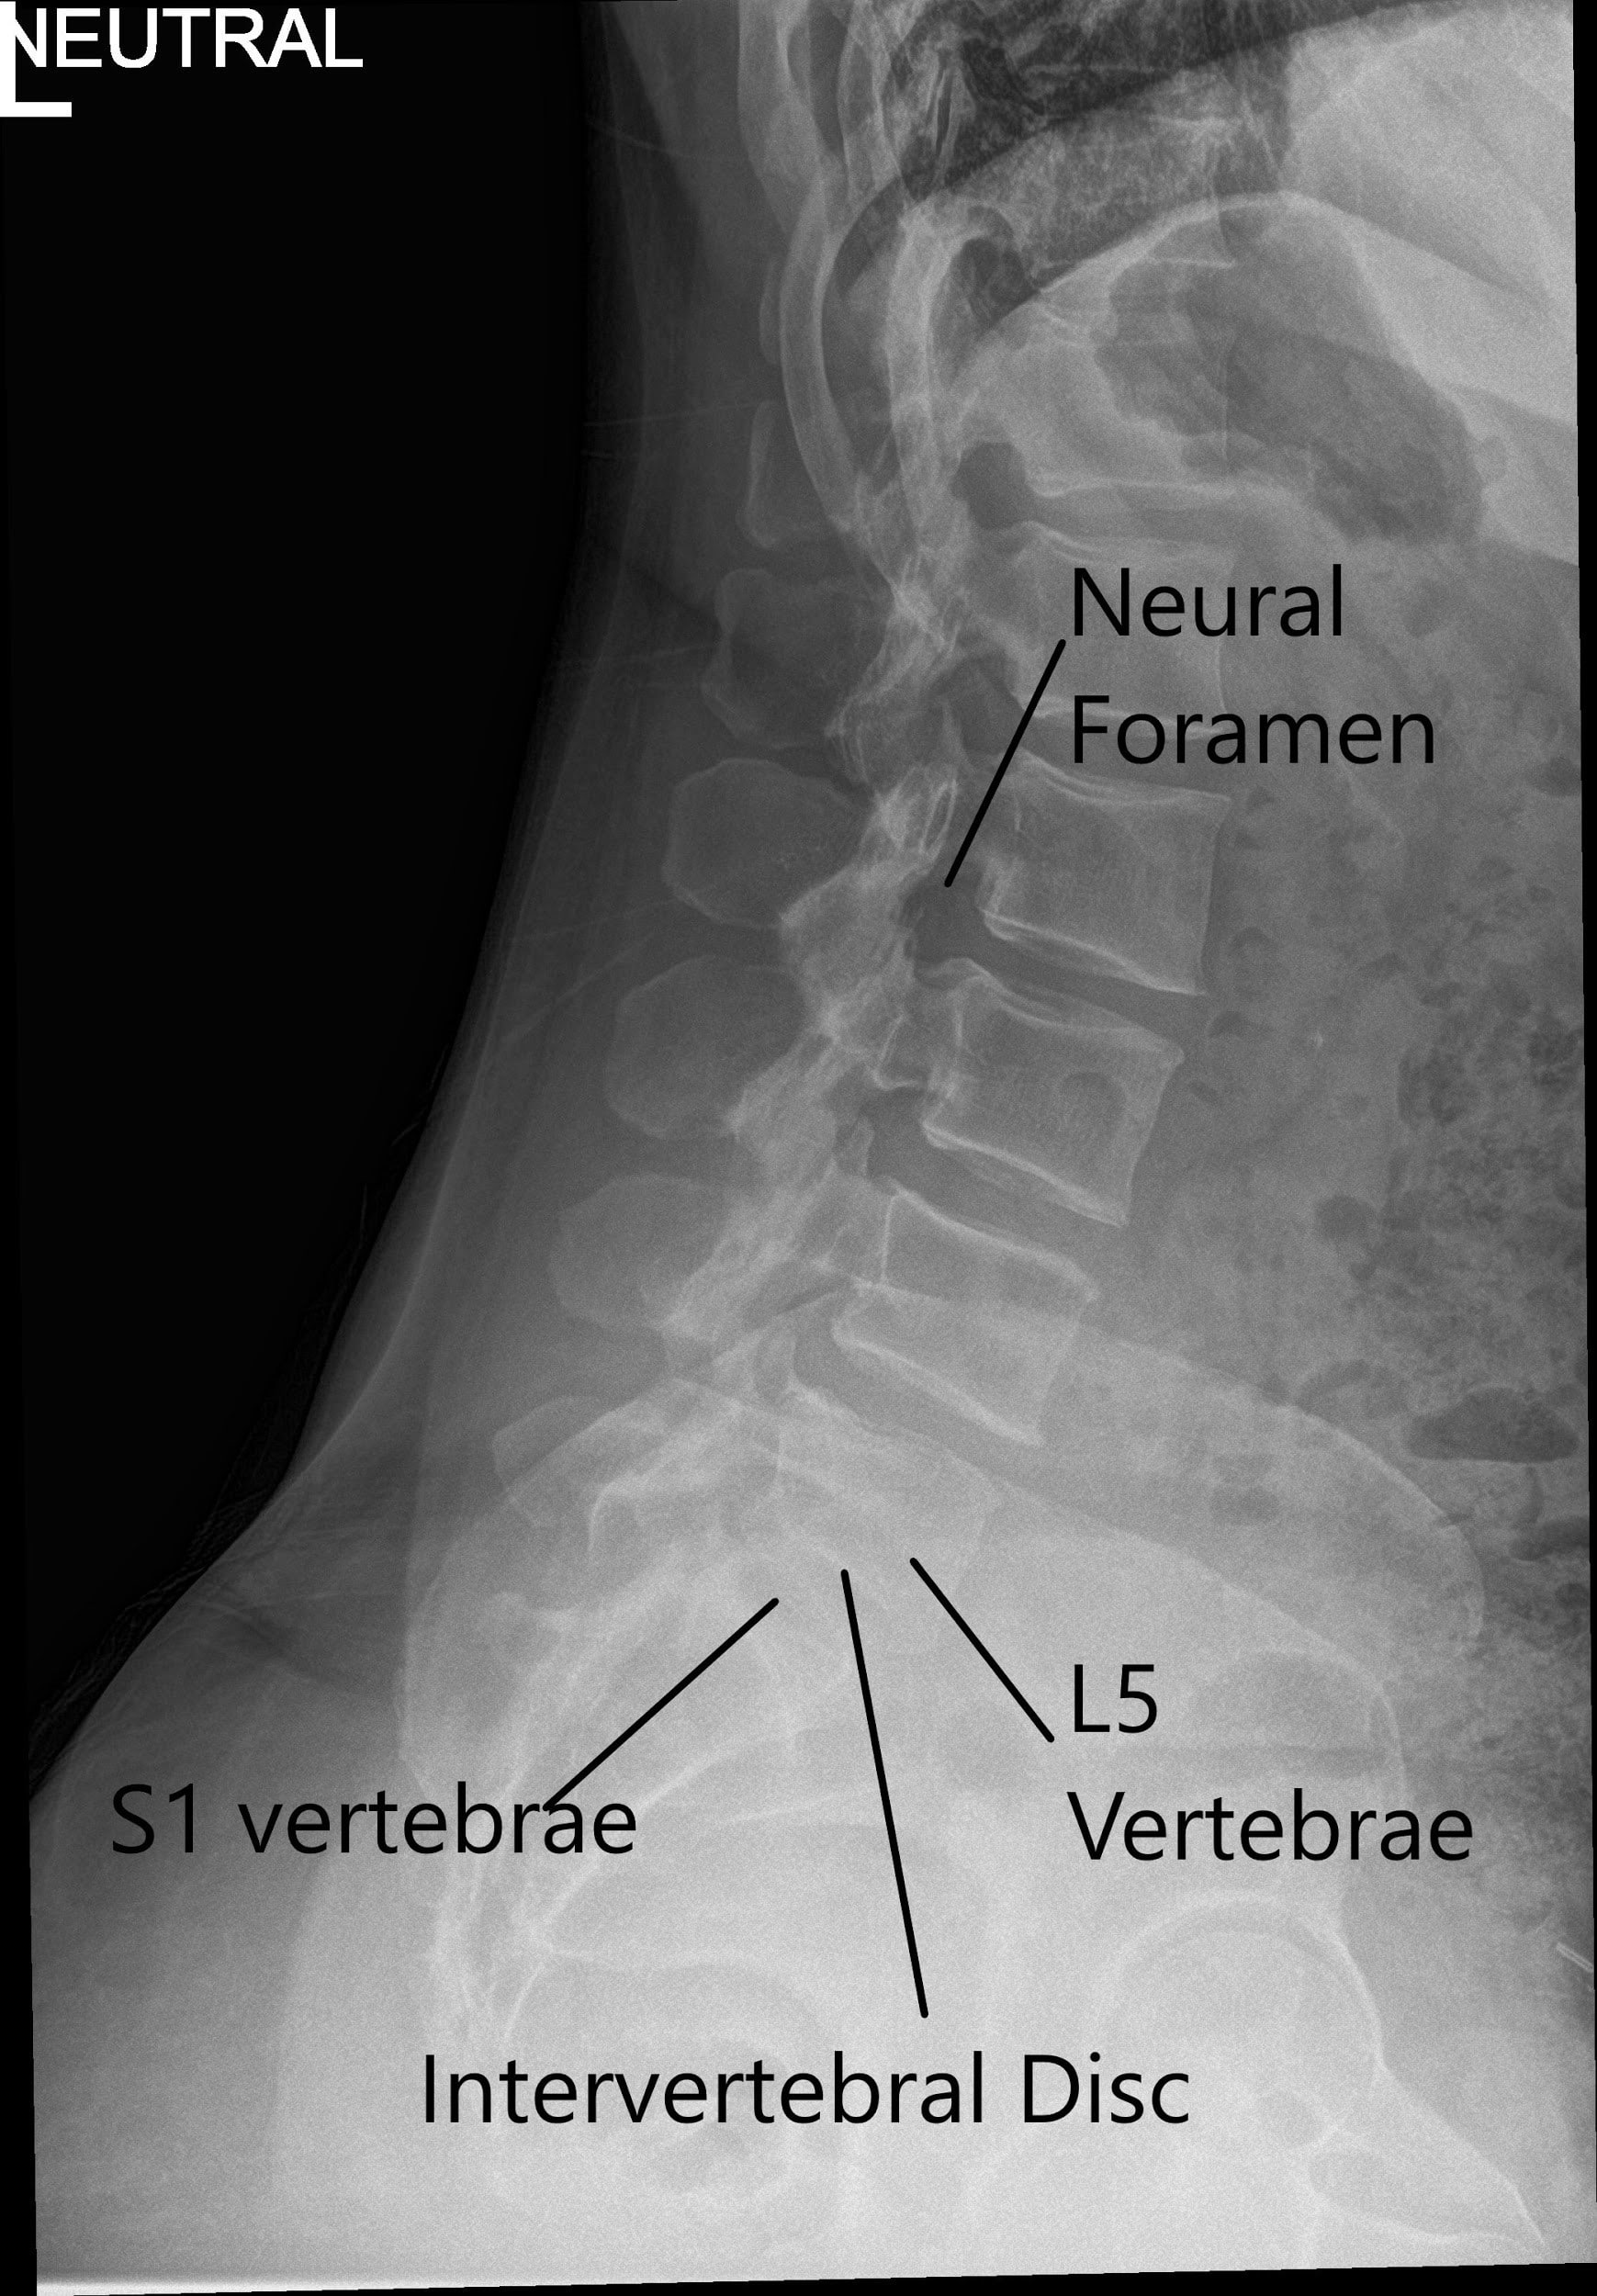 X-ray of the LS spine in AP and Lateral views showing degenerative changes 2